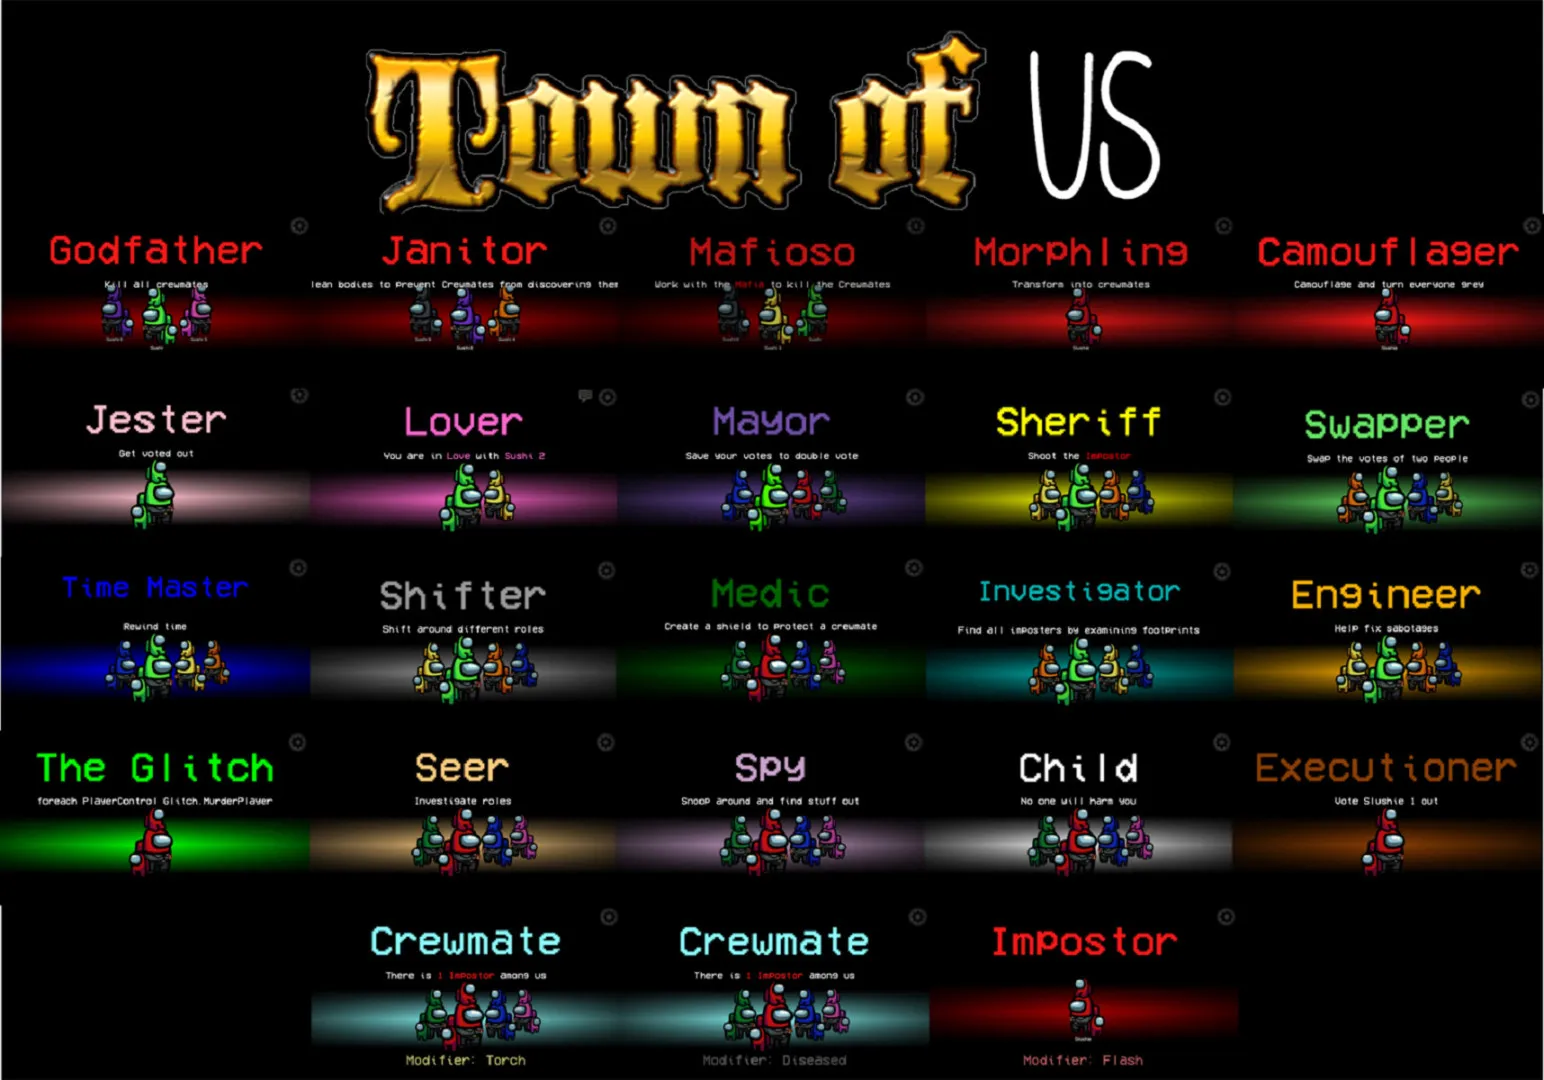 The Among Us 'Town of Us' mod adds 19 new roles to the game